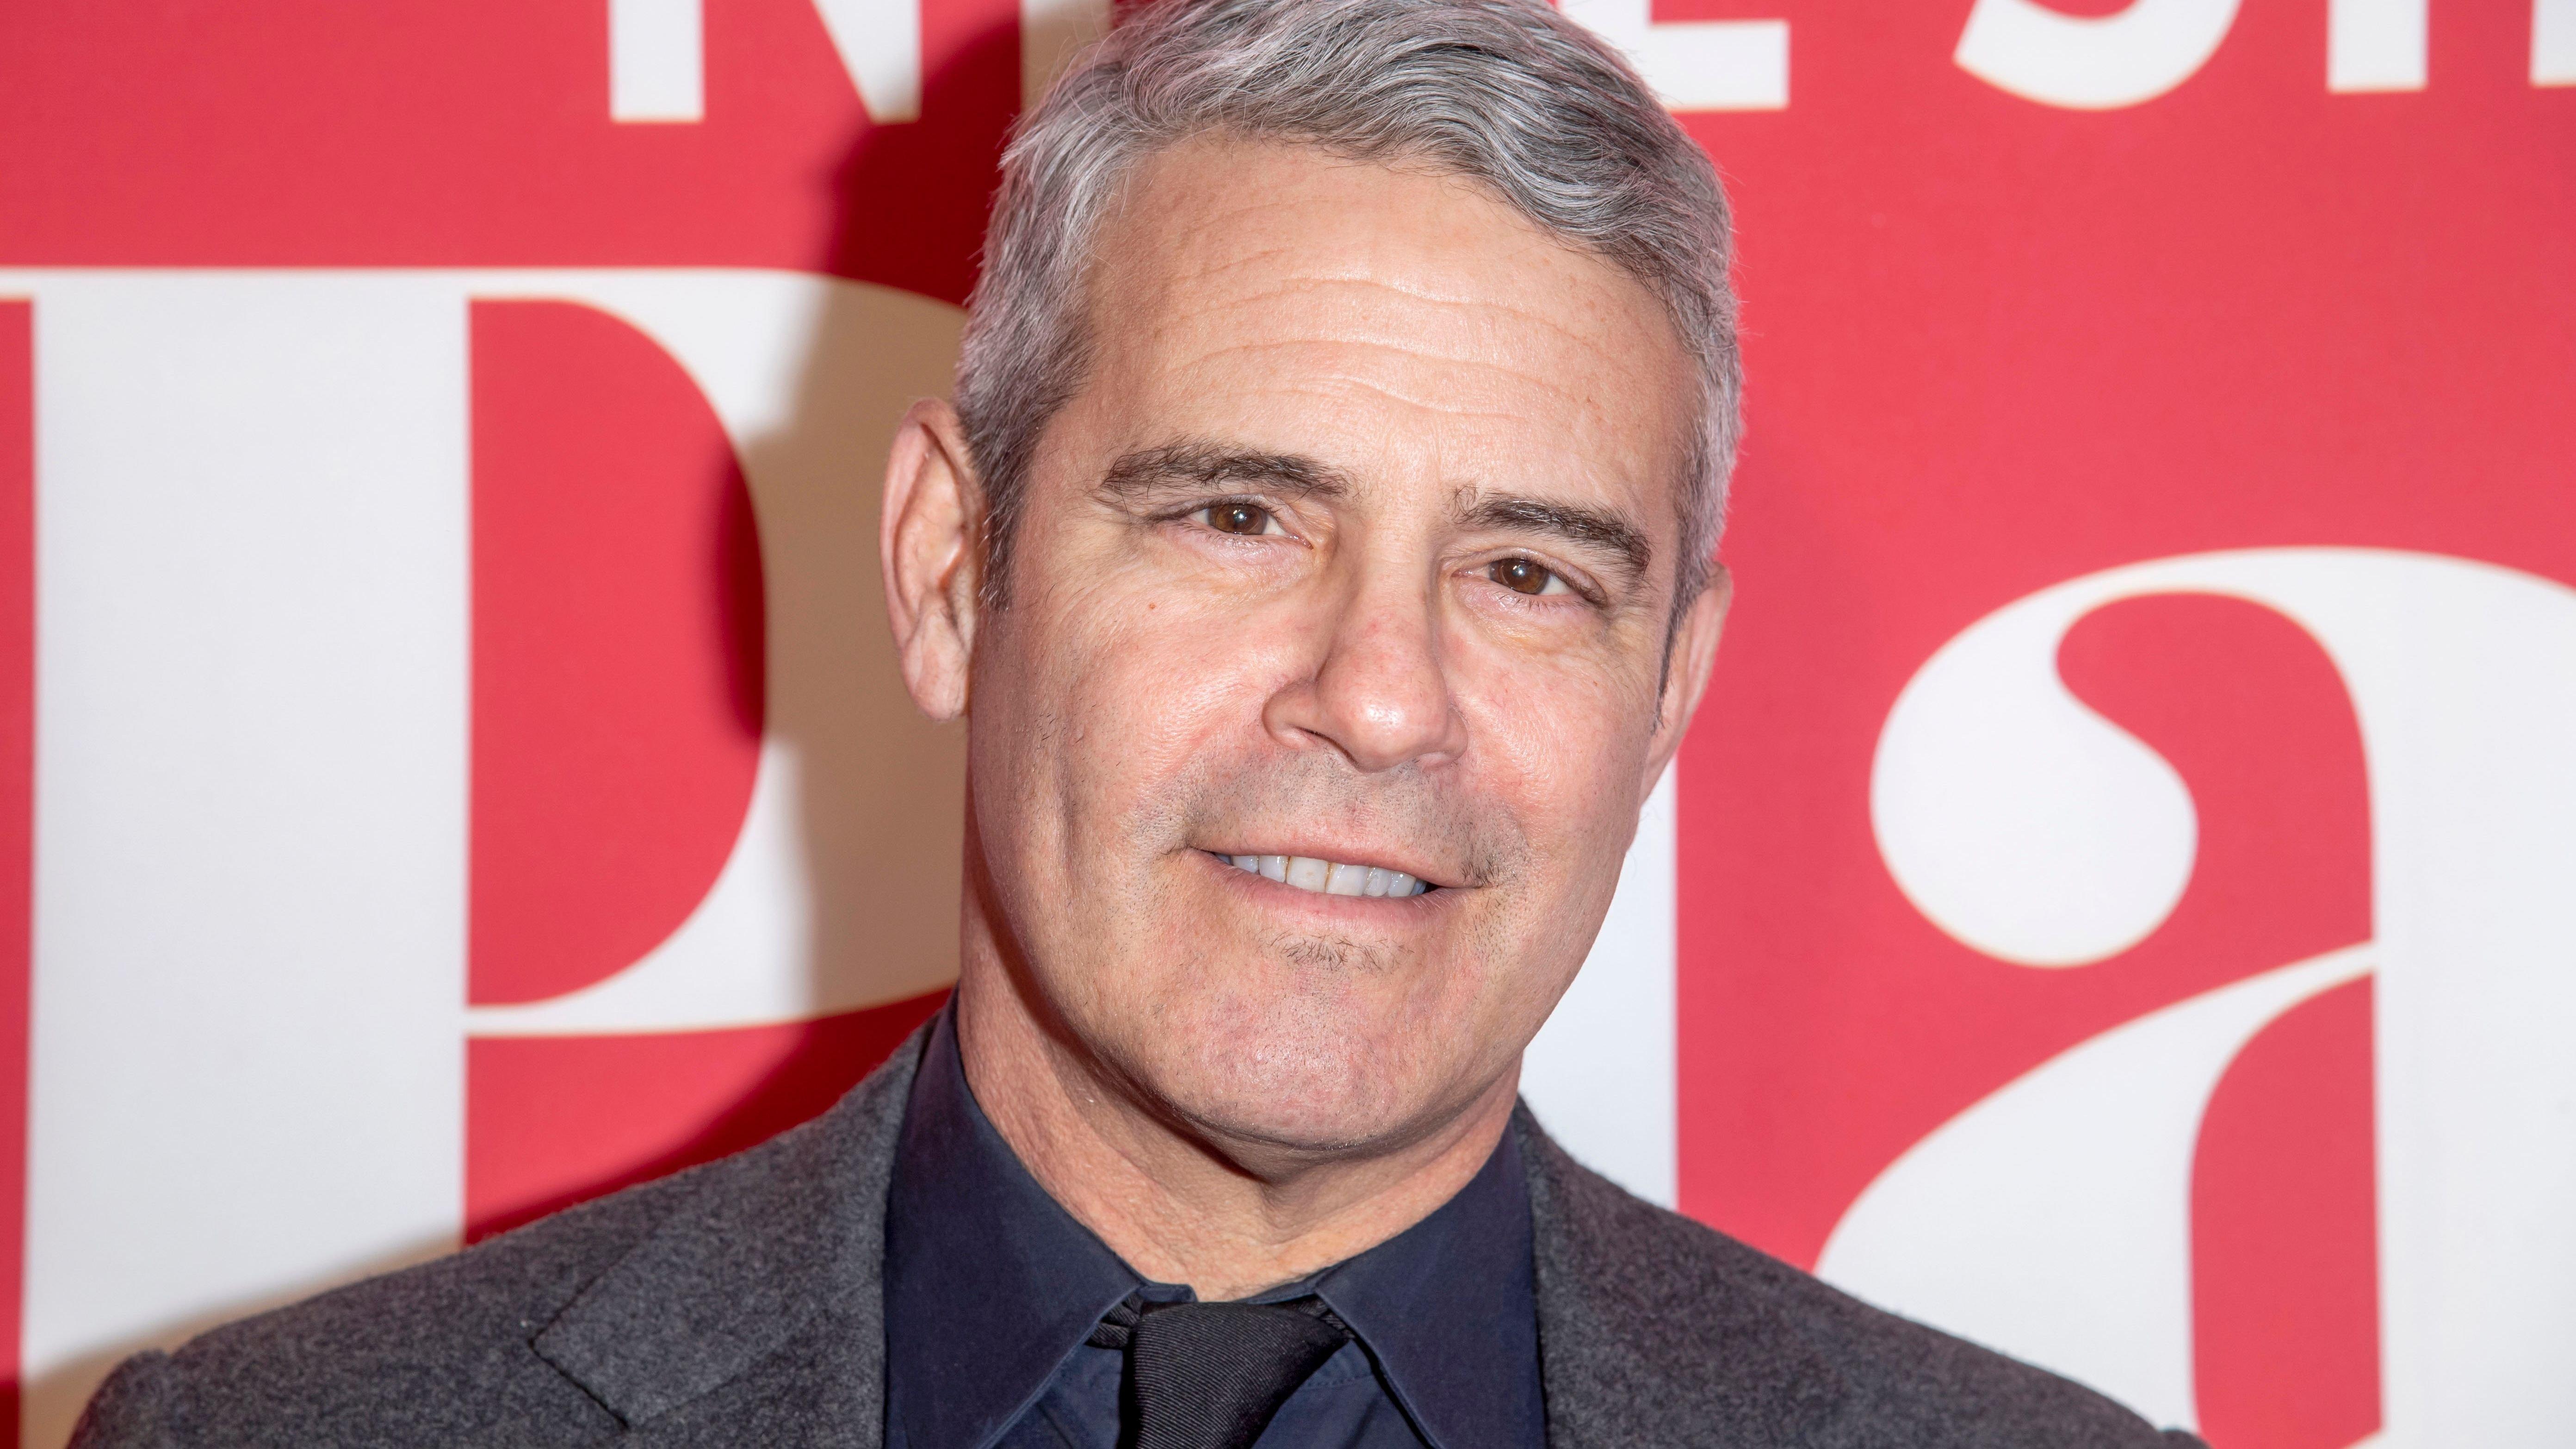 Andy Cohen wears gray suit and button-down